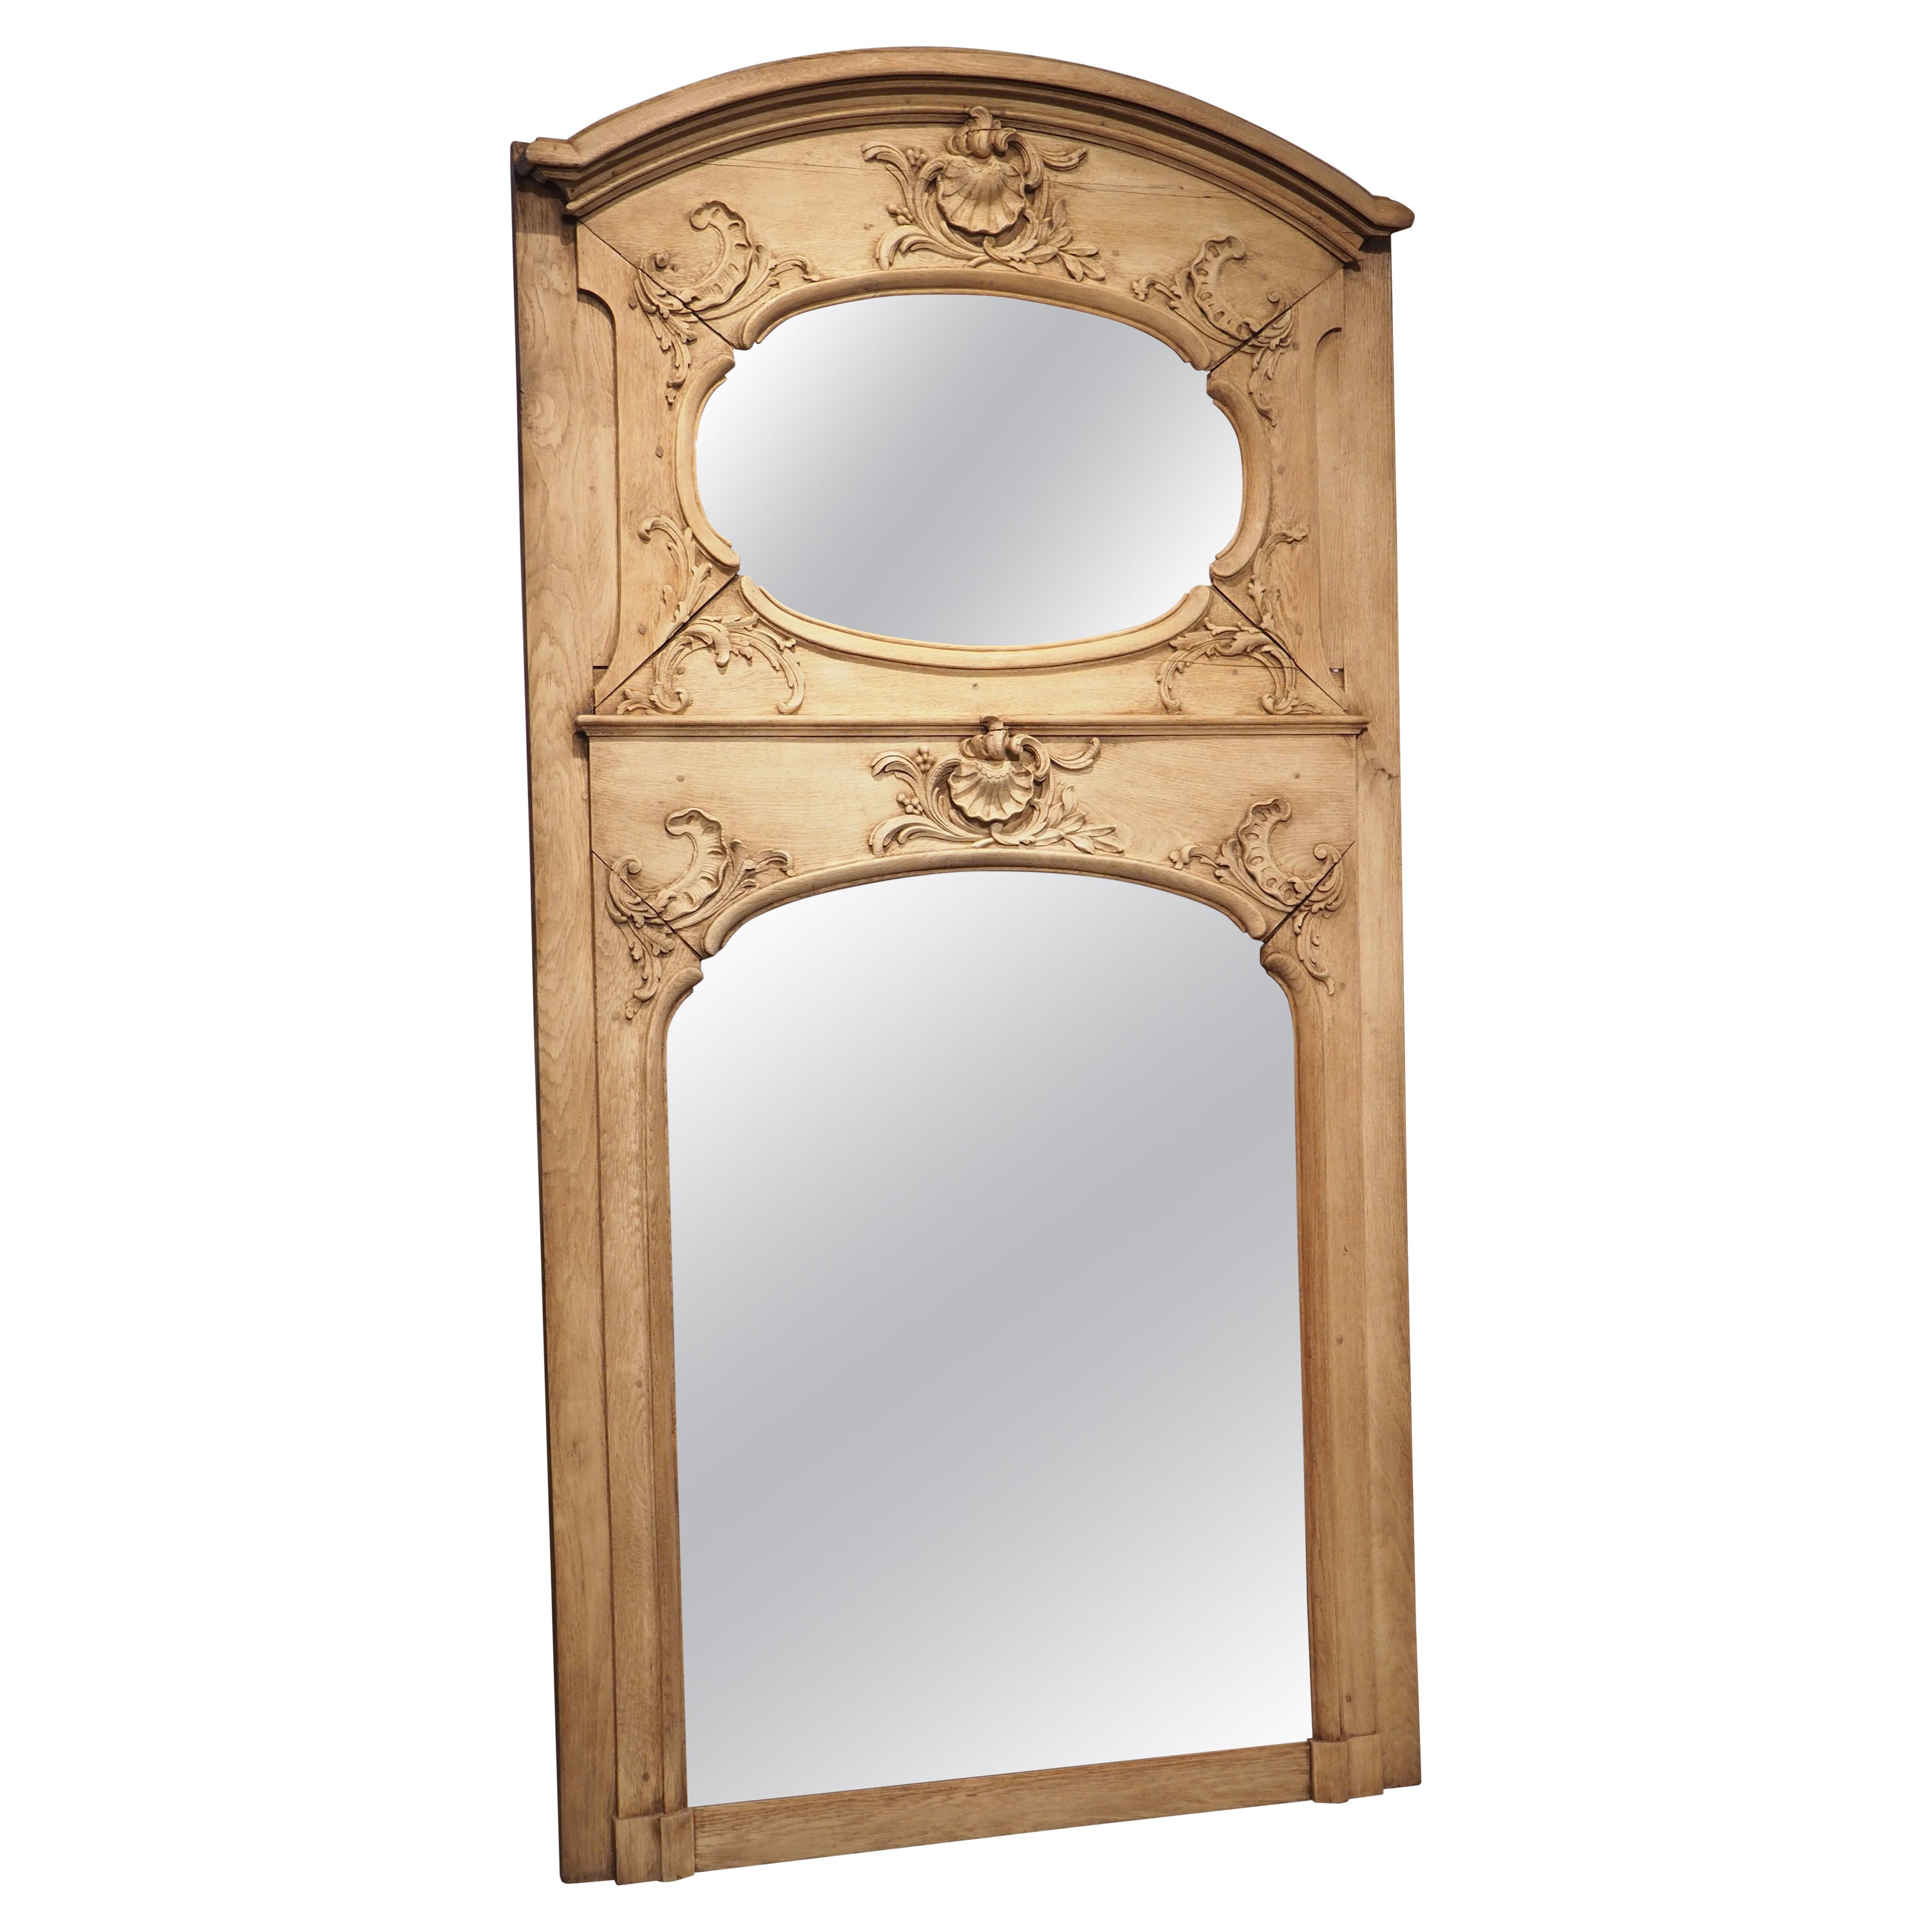 19th Century French Regence Style Bleached Oak Trumeau Mirror For Sale